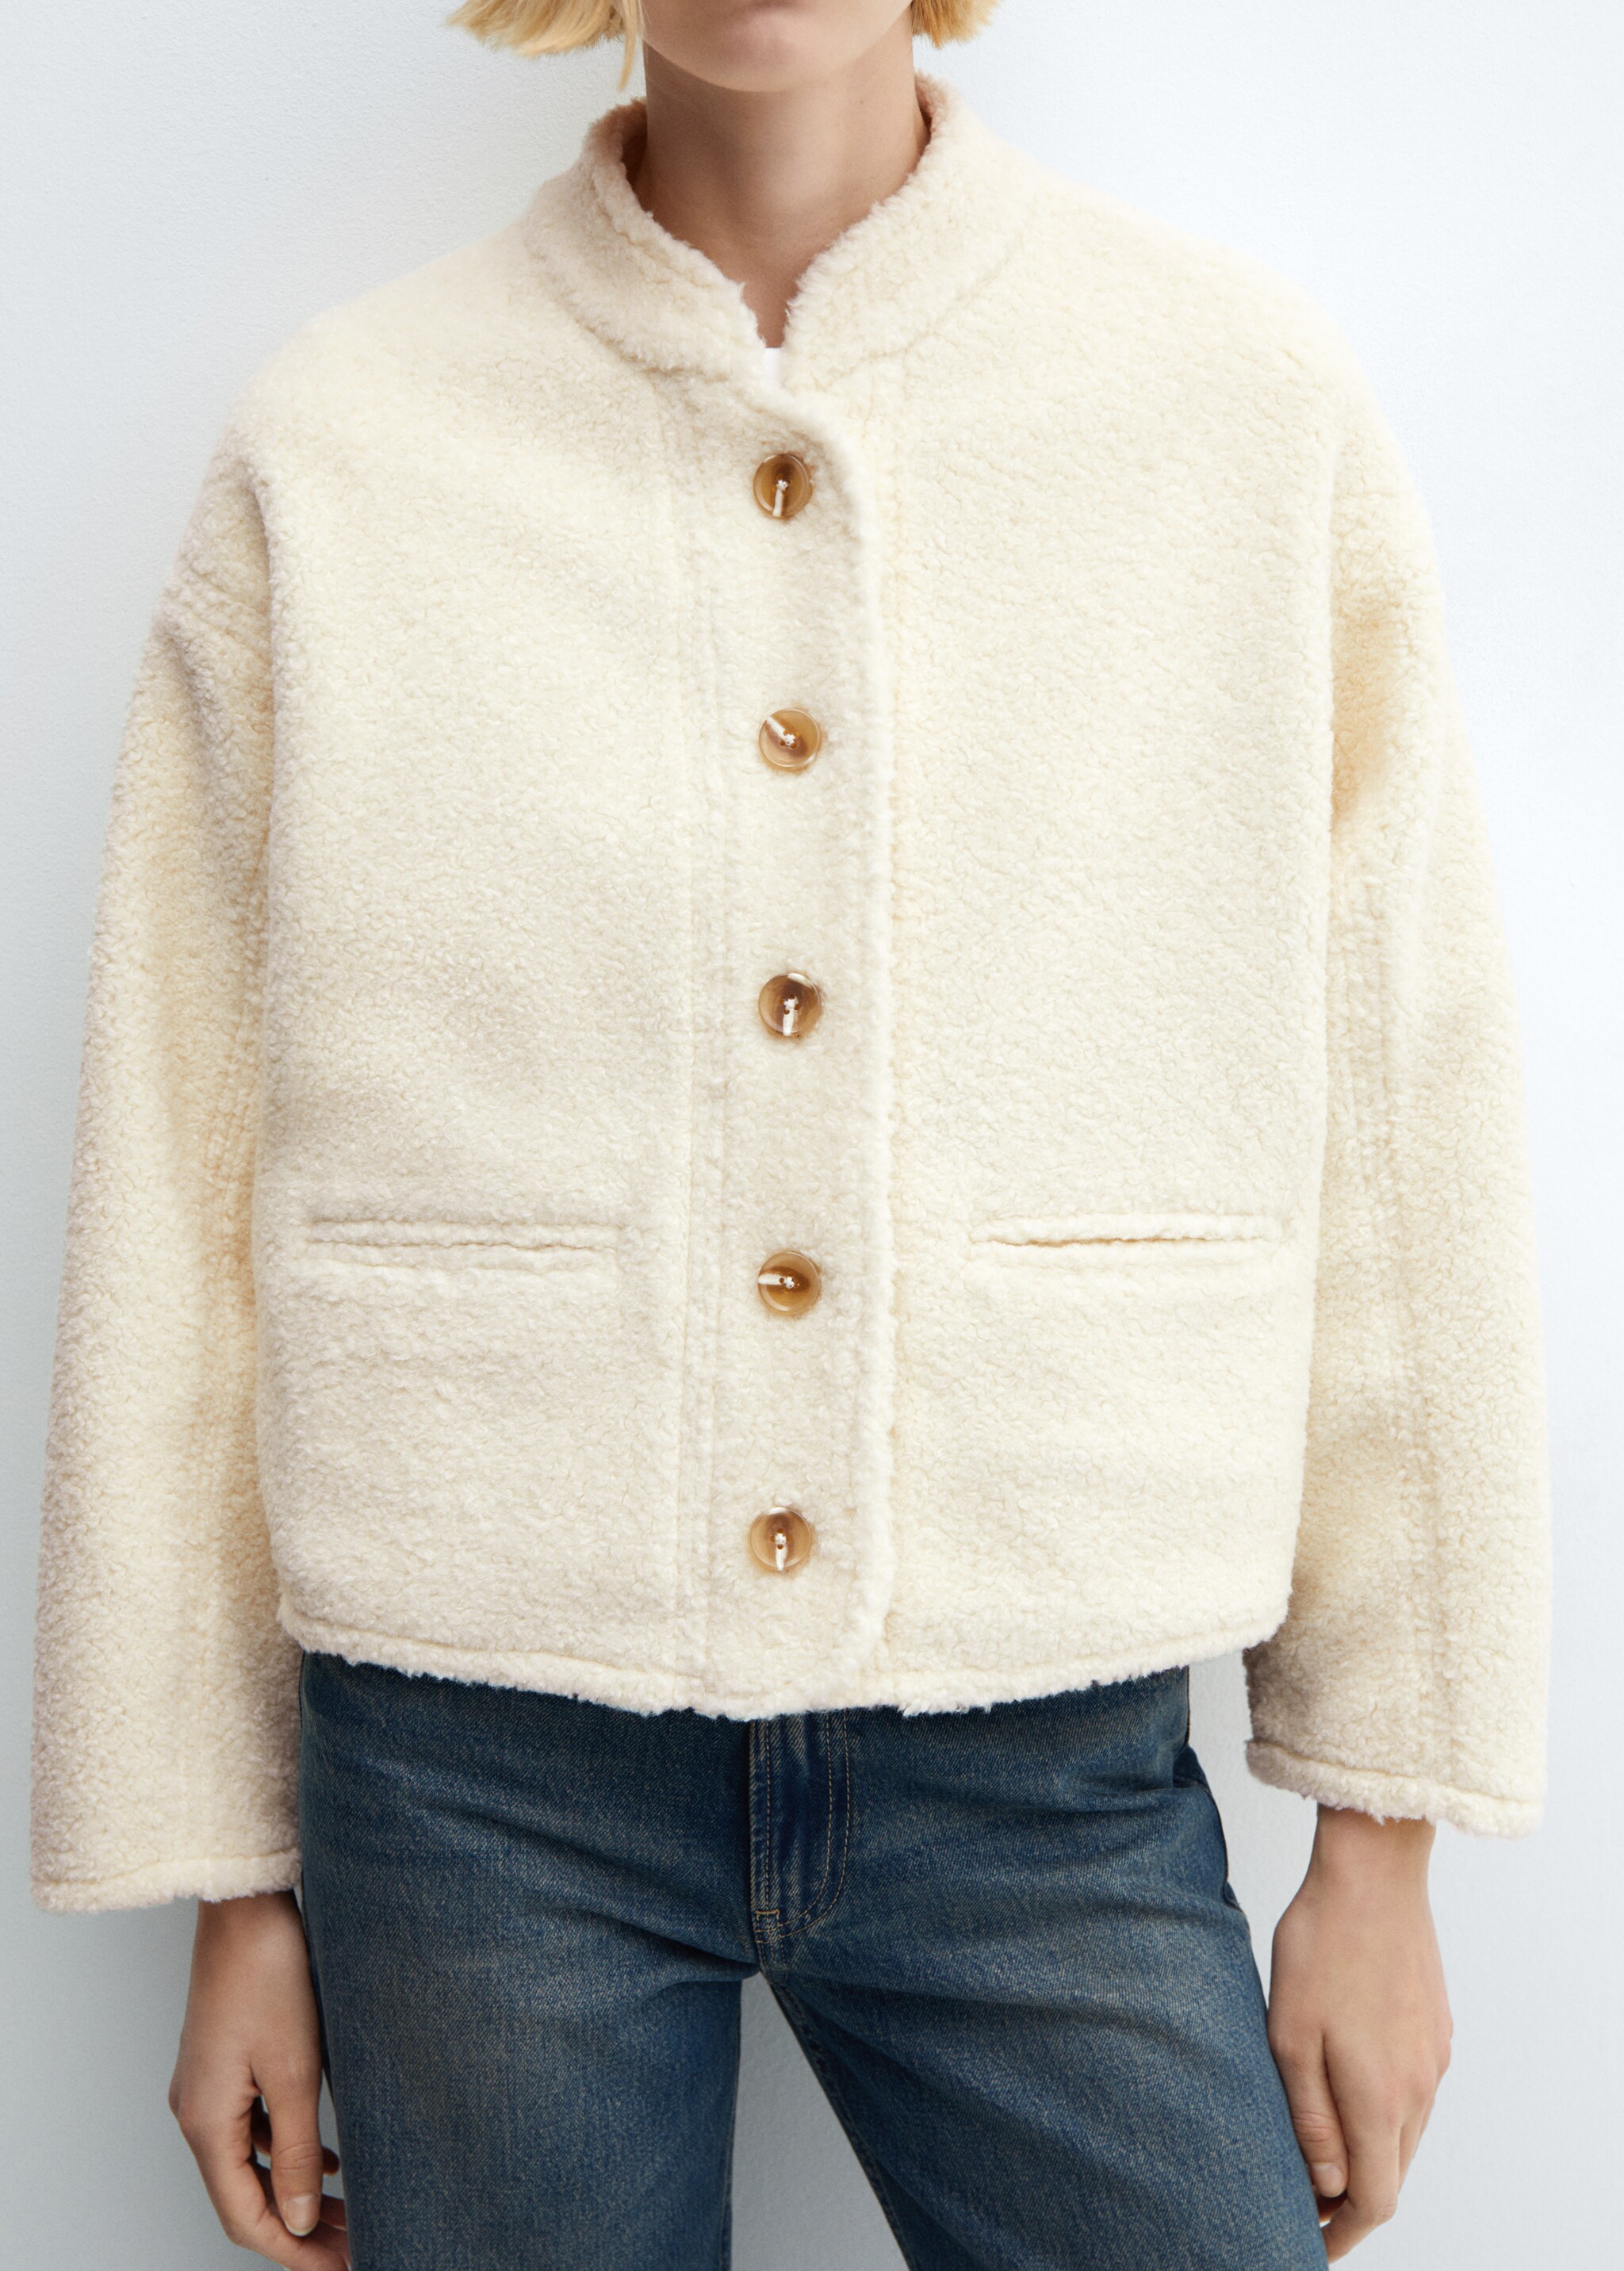 Faux shearling jacket - Details of the article 6